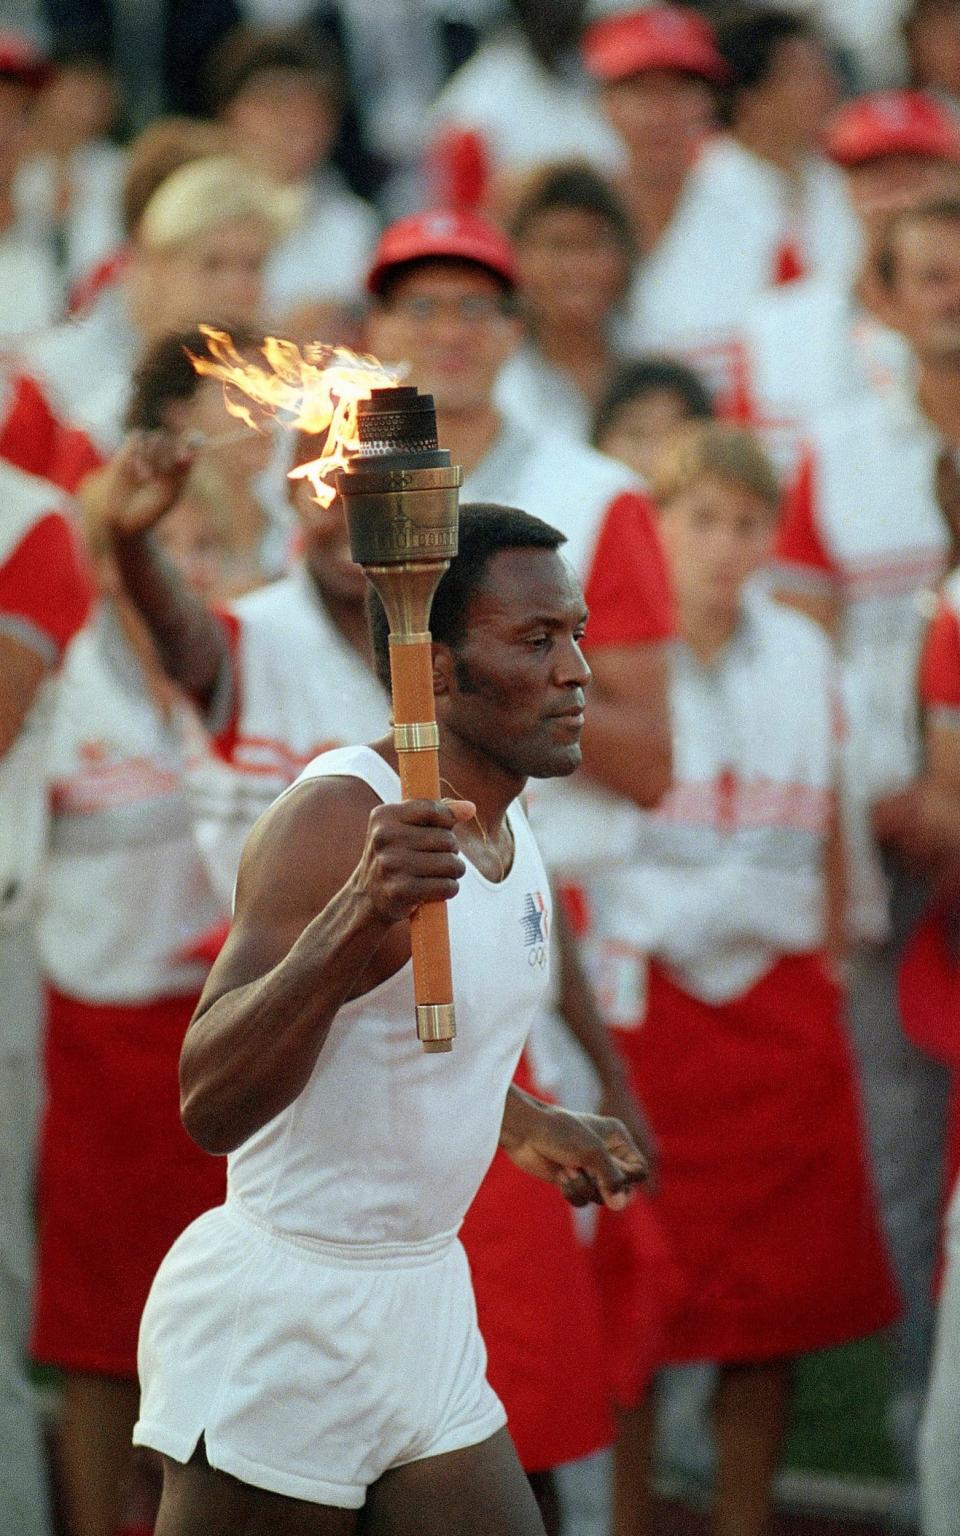 Rafer Johnson carrying the Olympic torch through the Los Angeles Memorial Coliseum before lighting the Olympic flame and formally launching the 1984 Games - Peter Leabo/ AP